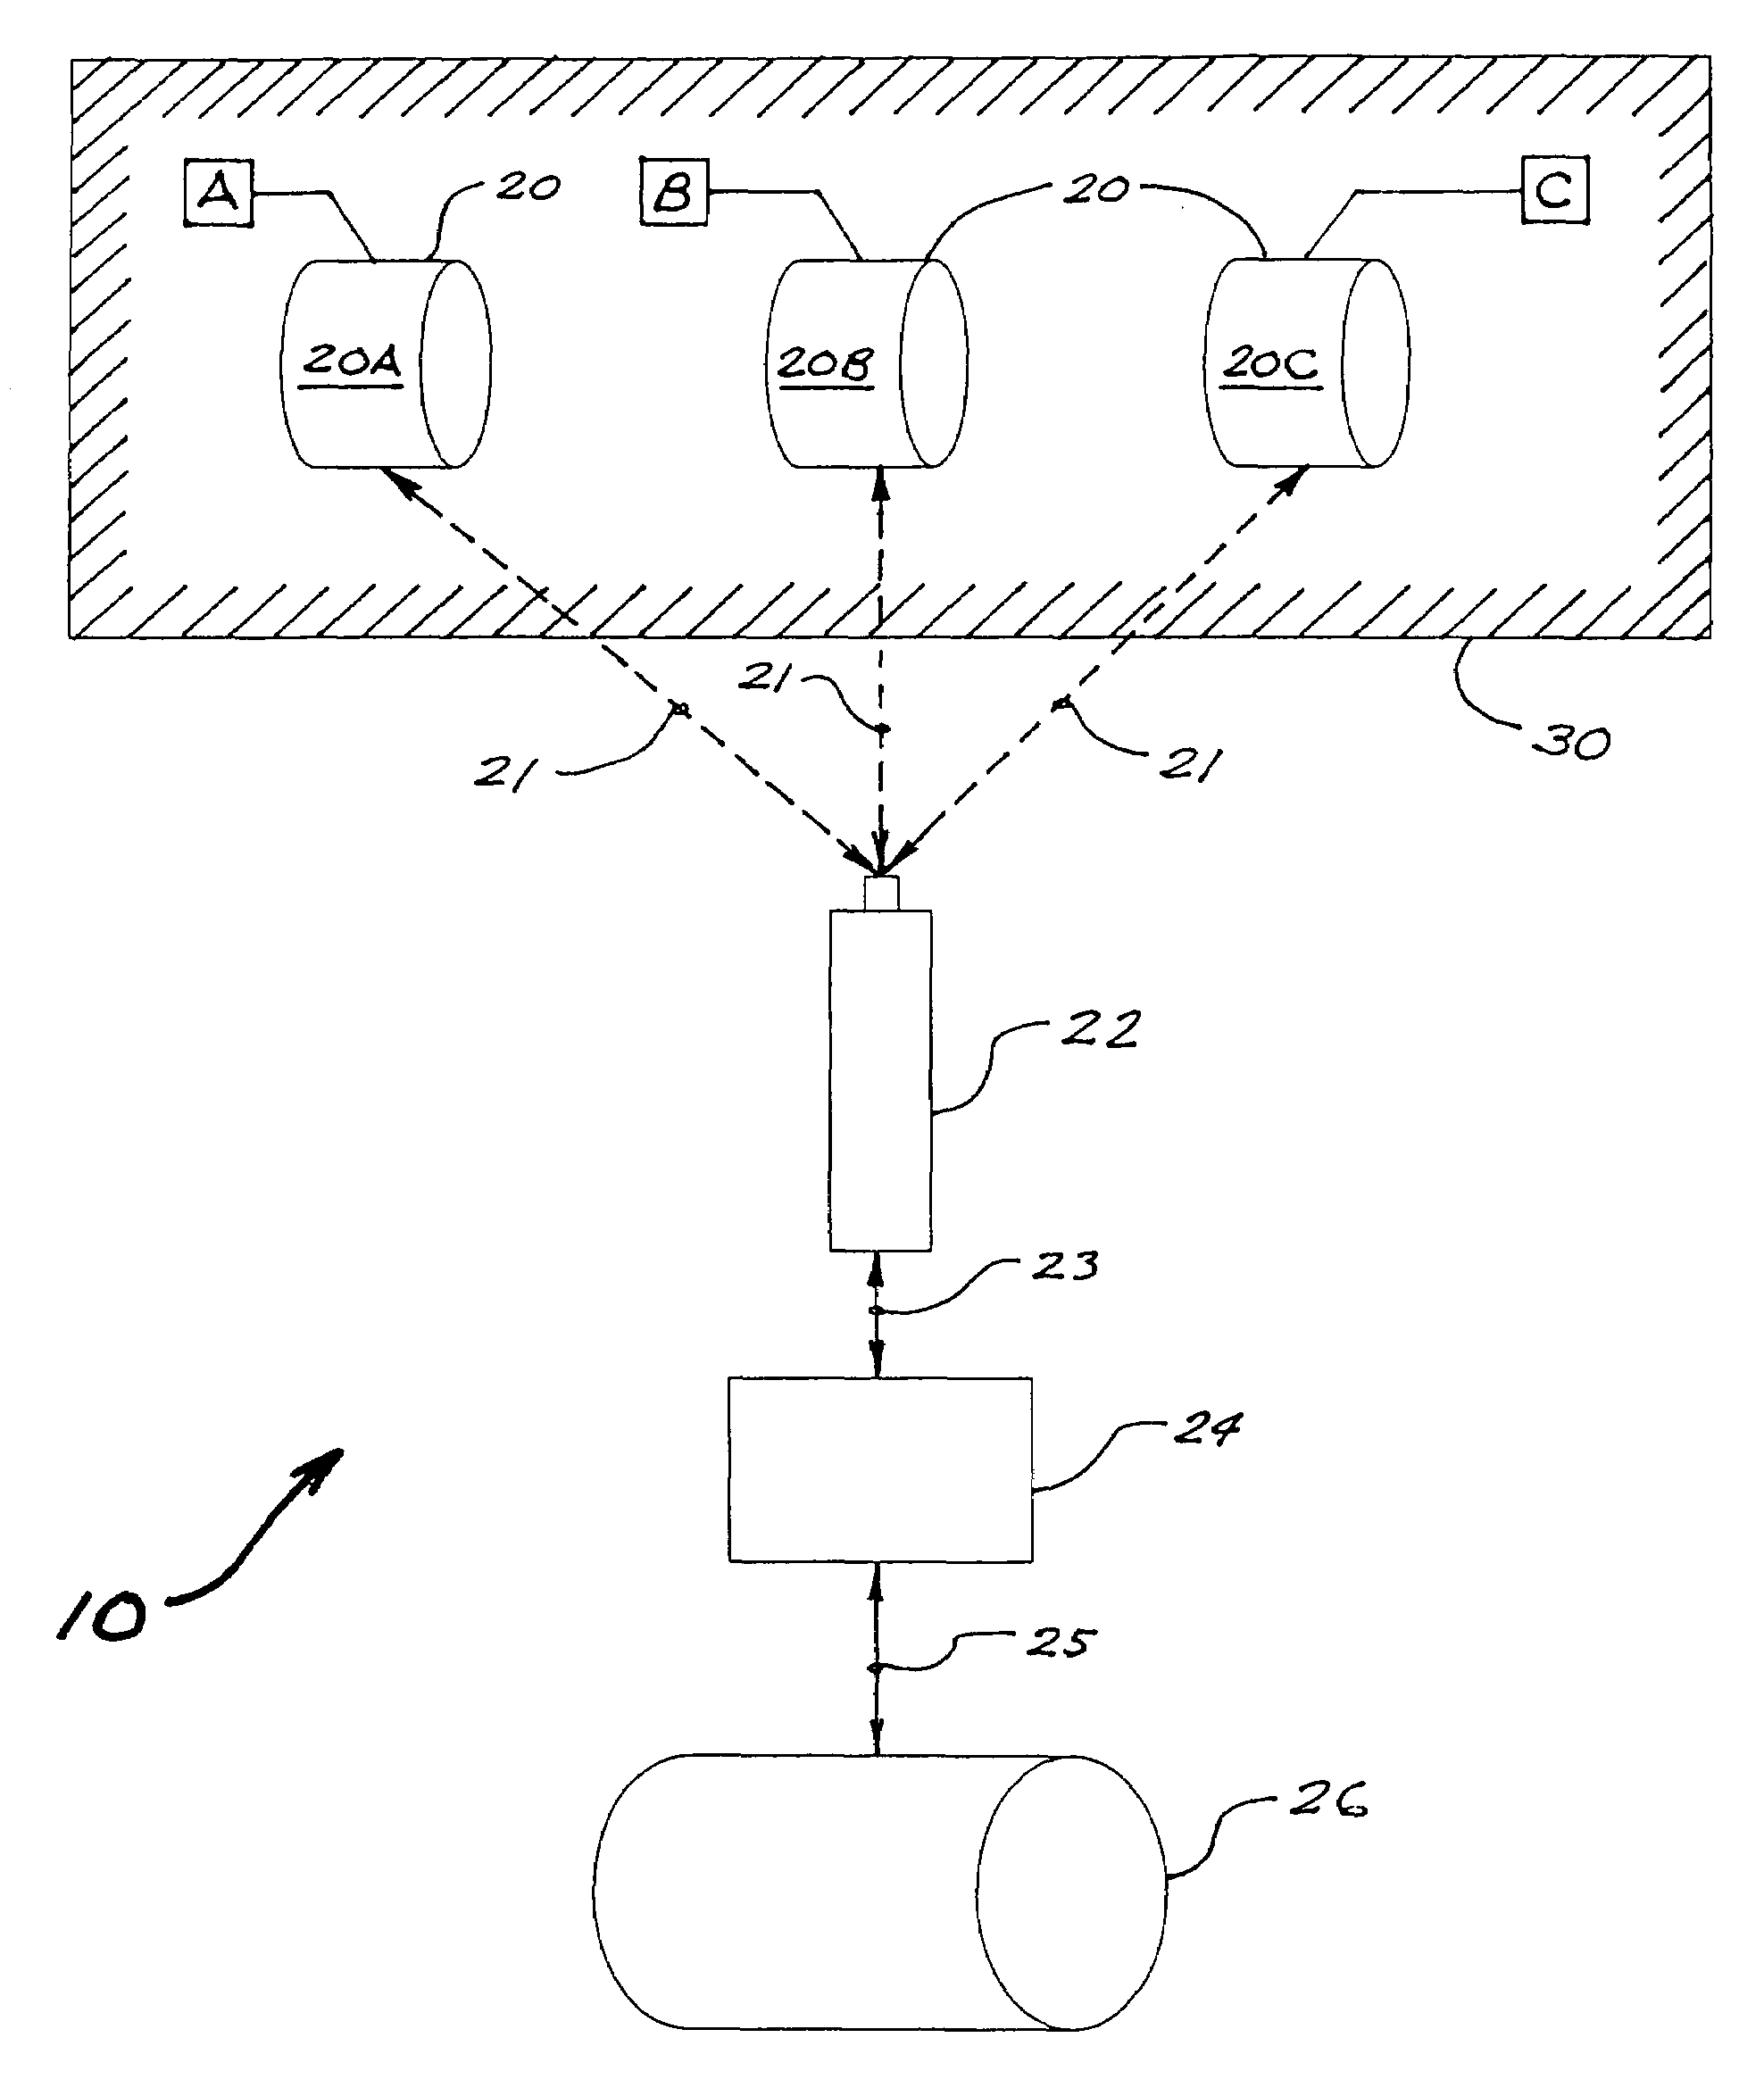 System and method for storing and retrieving equipment inspection and maintenance data